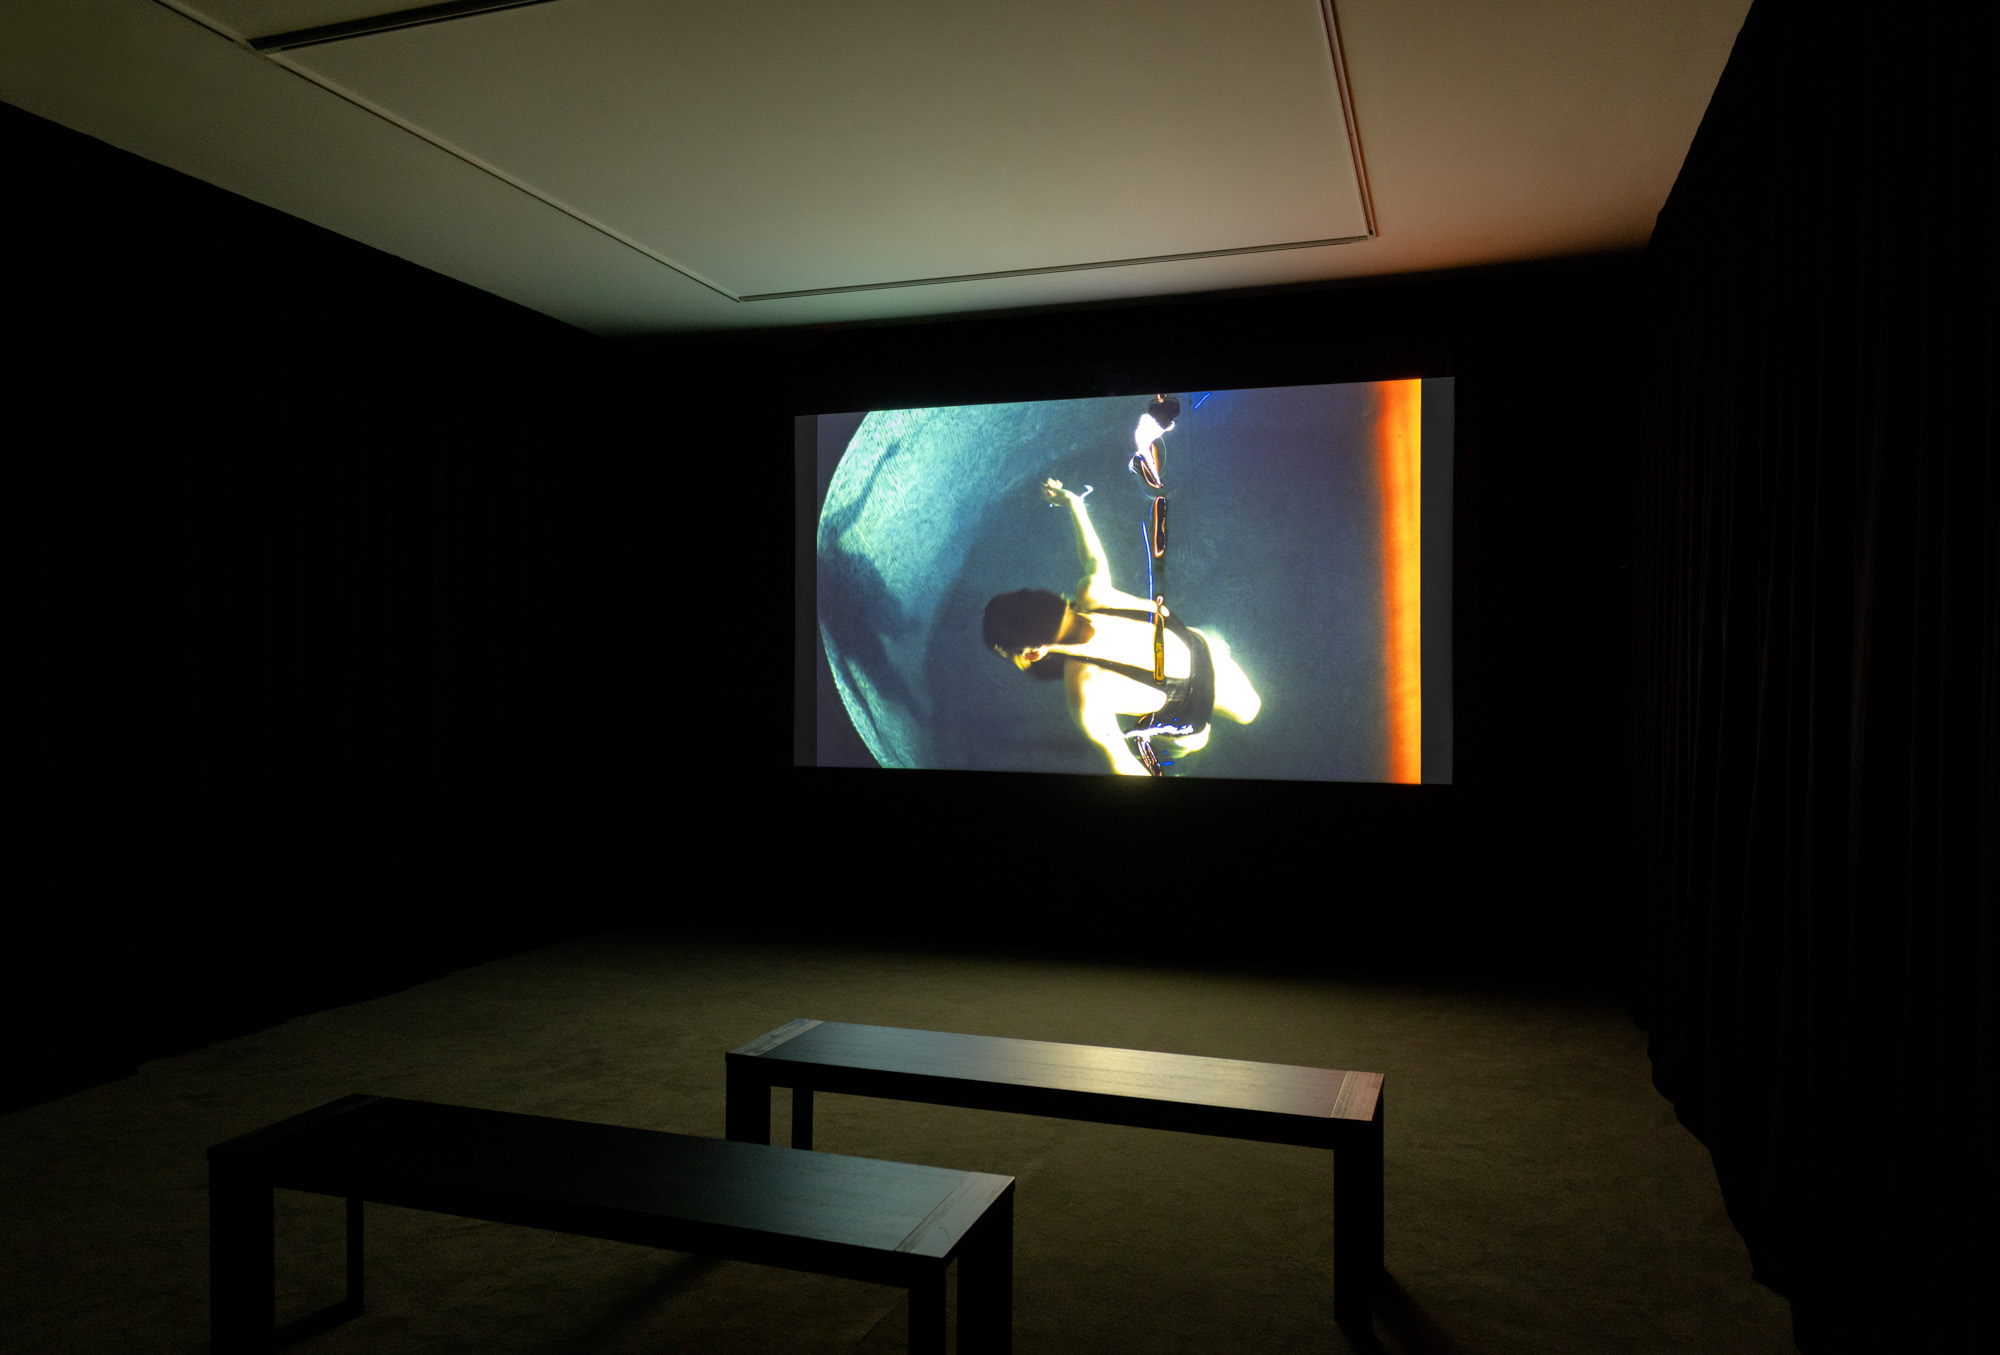 Color image of a screening room with projection depicting a figure swimming in pool